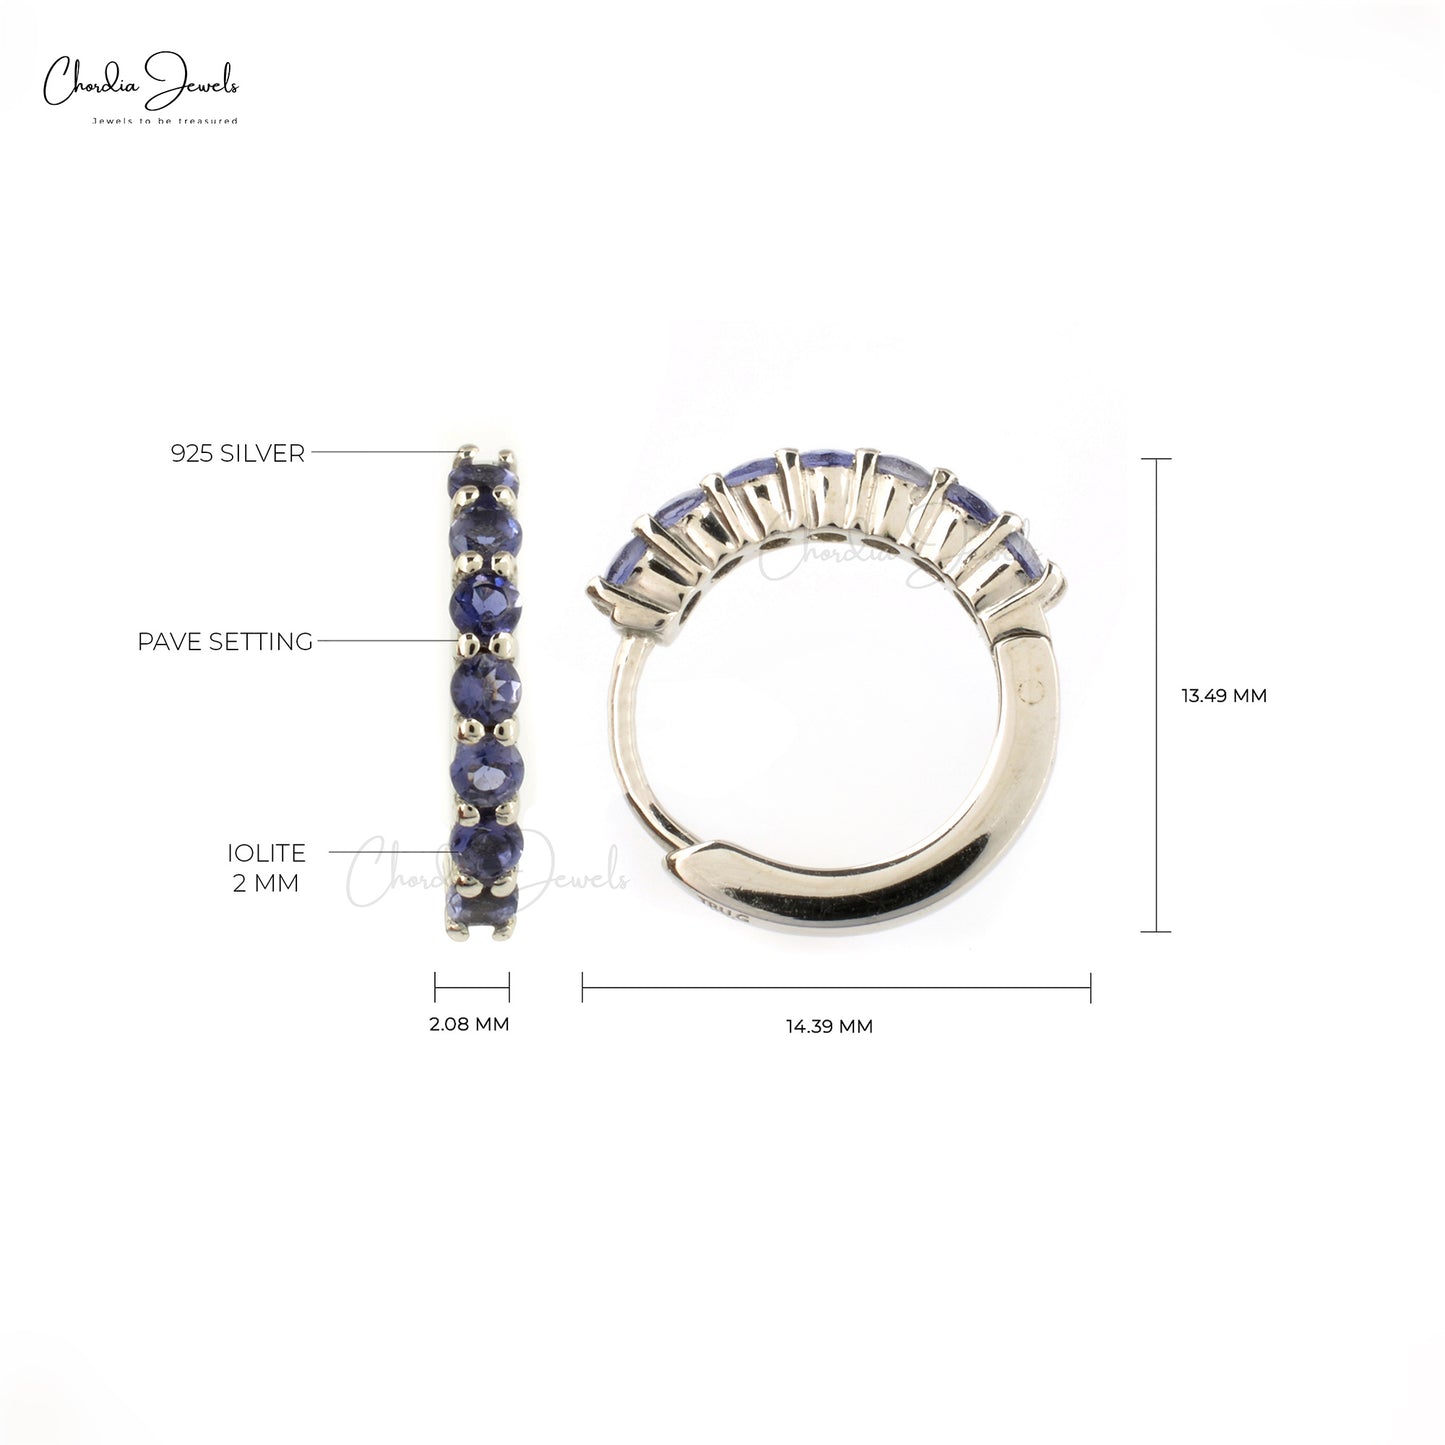 Top Quality Iolite Dainty Earrings 925 Sterling Silver Hoop Jewelry  For Women From Supplier At Discount Price